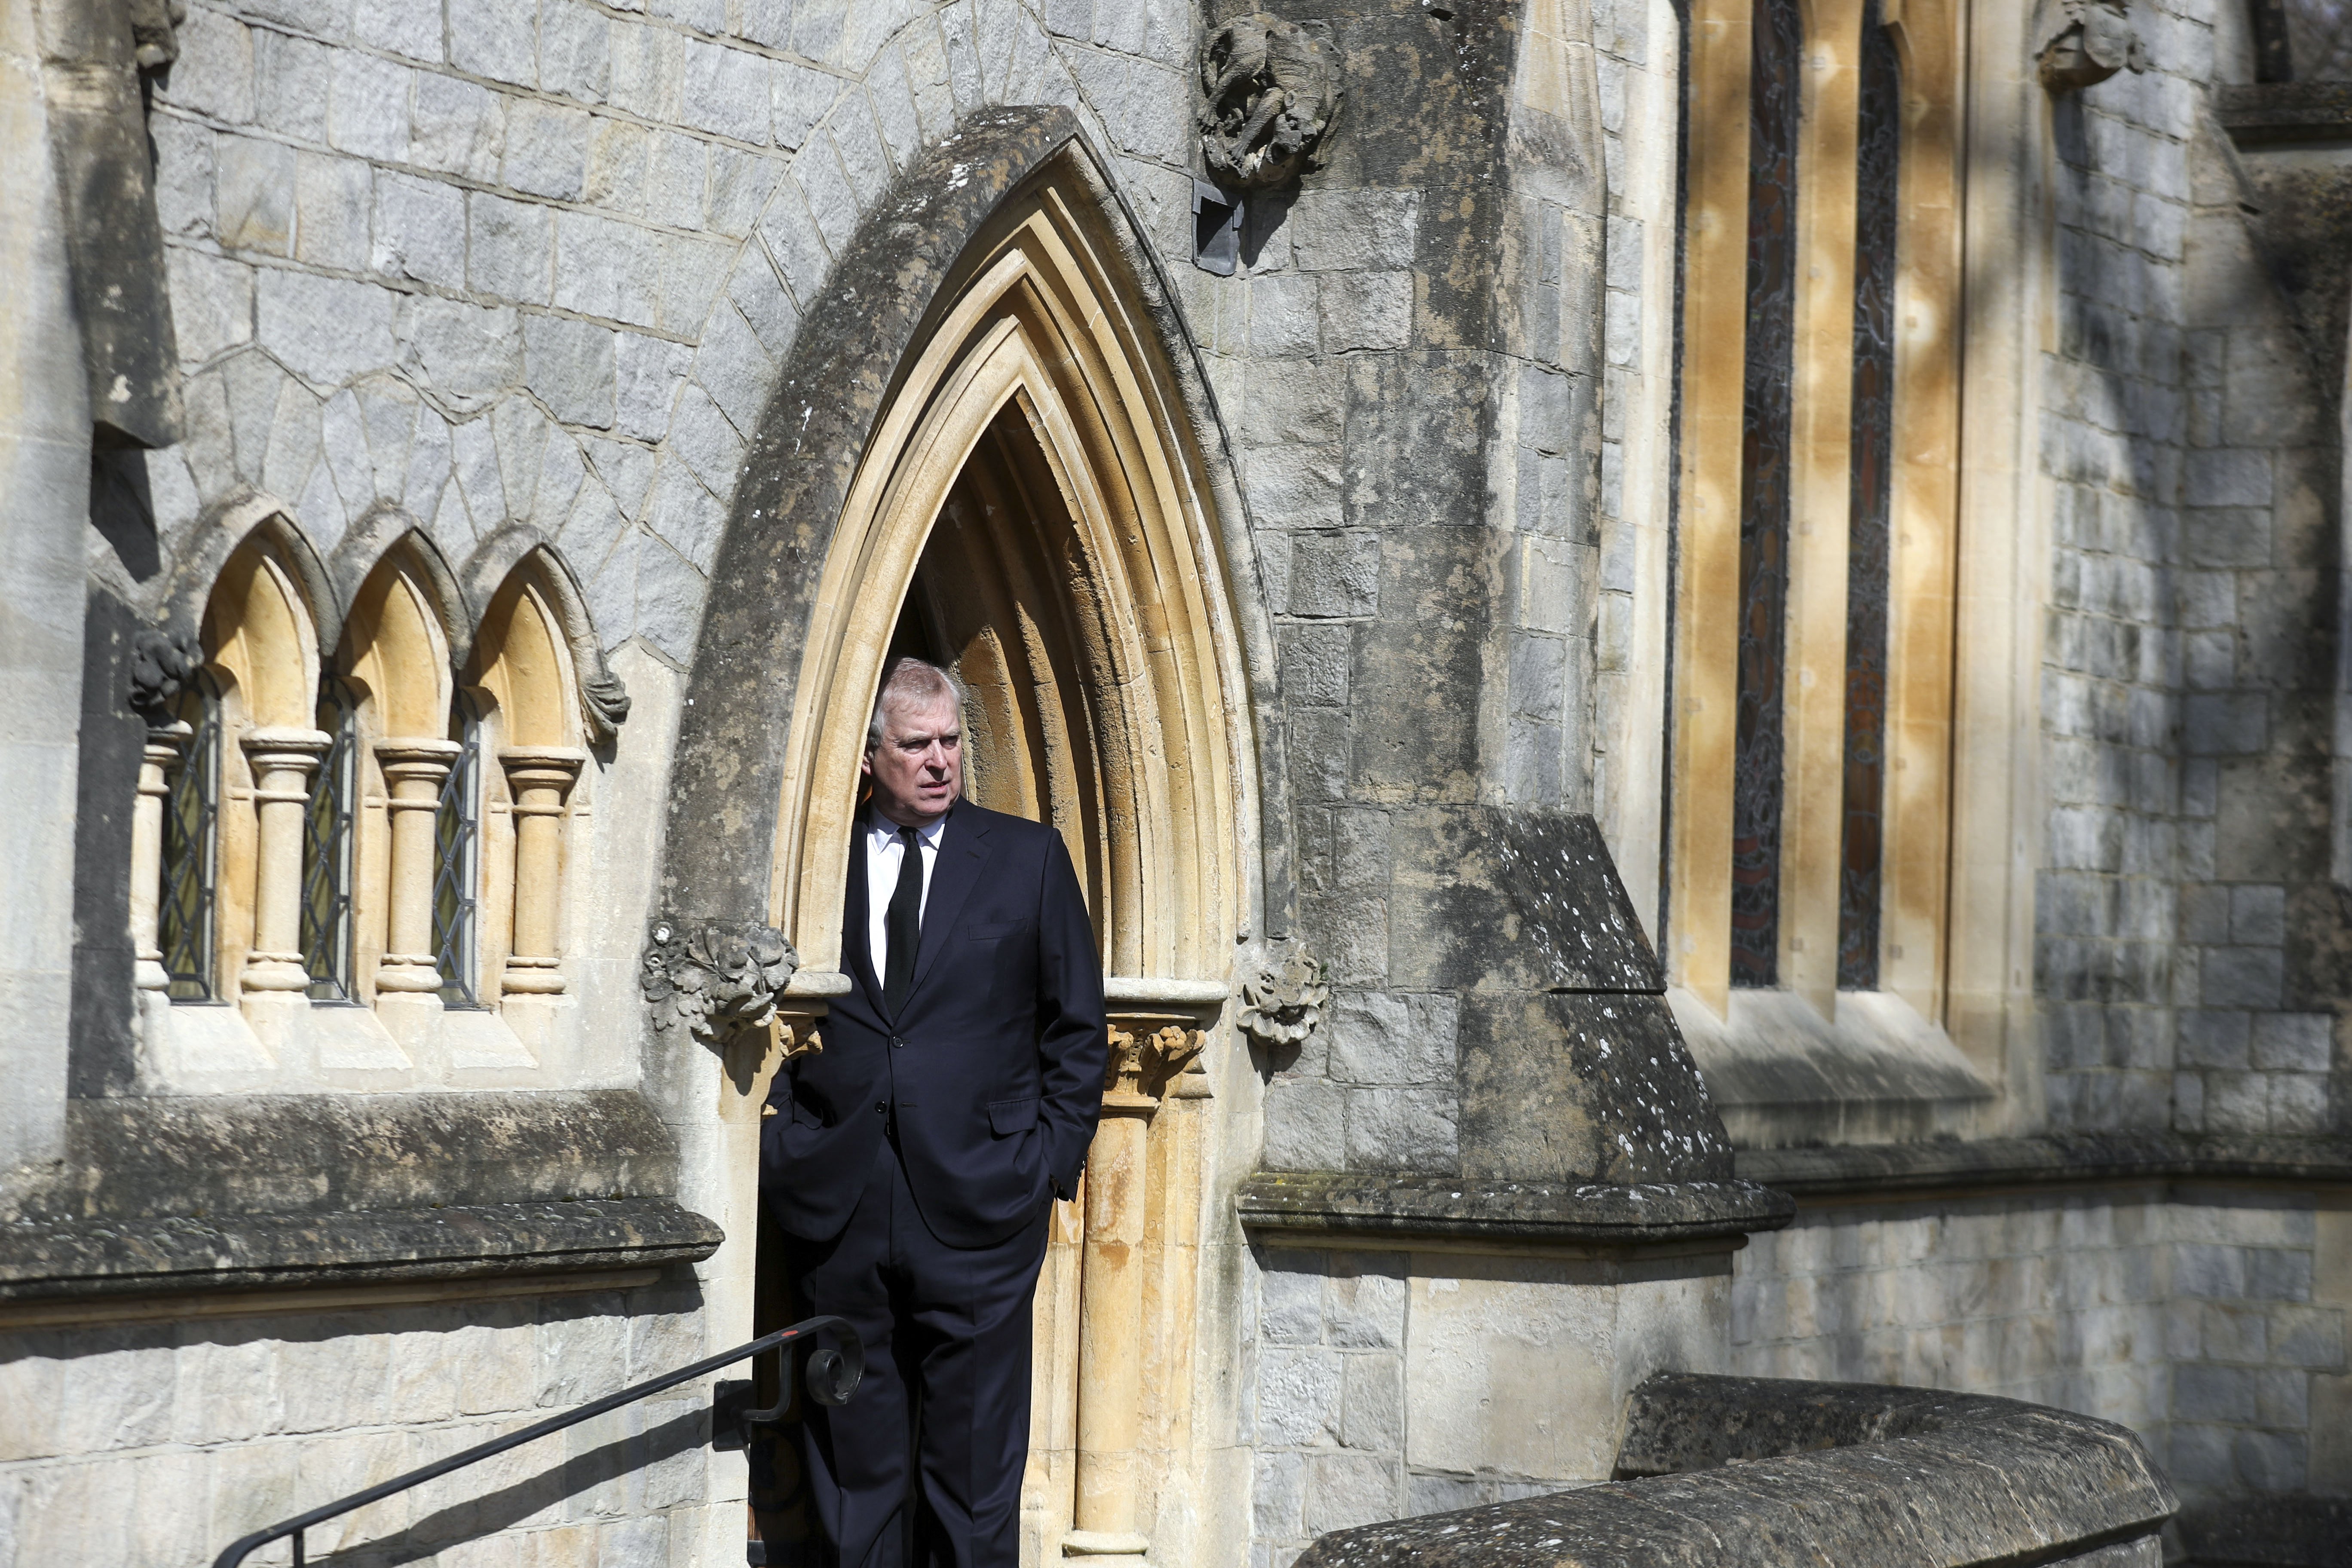 Britain's Prince Andrew, Duke of York, attends Sunday service at the Royal Chapel of All Saints, at Royal Lodge, in Windsor on April 11, 2021, two days after the death of his father Britain's Prince Philip, Duke of Edinburgh. | Source: Getty Images